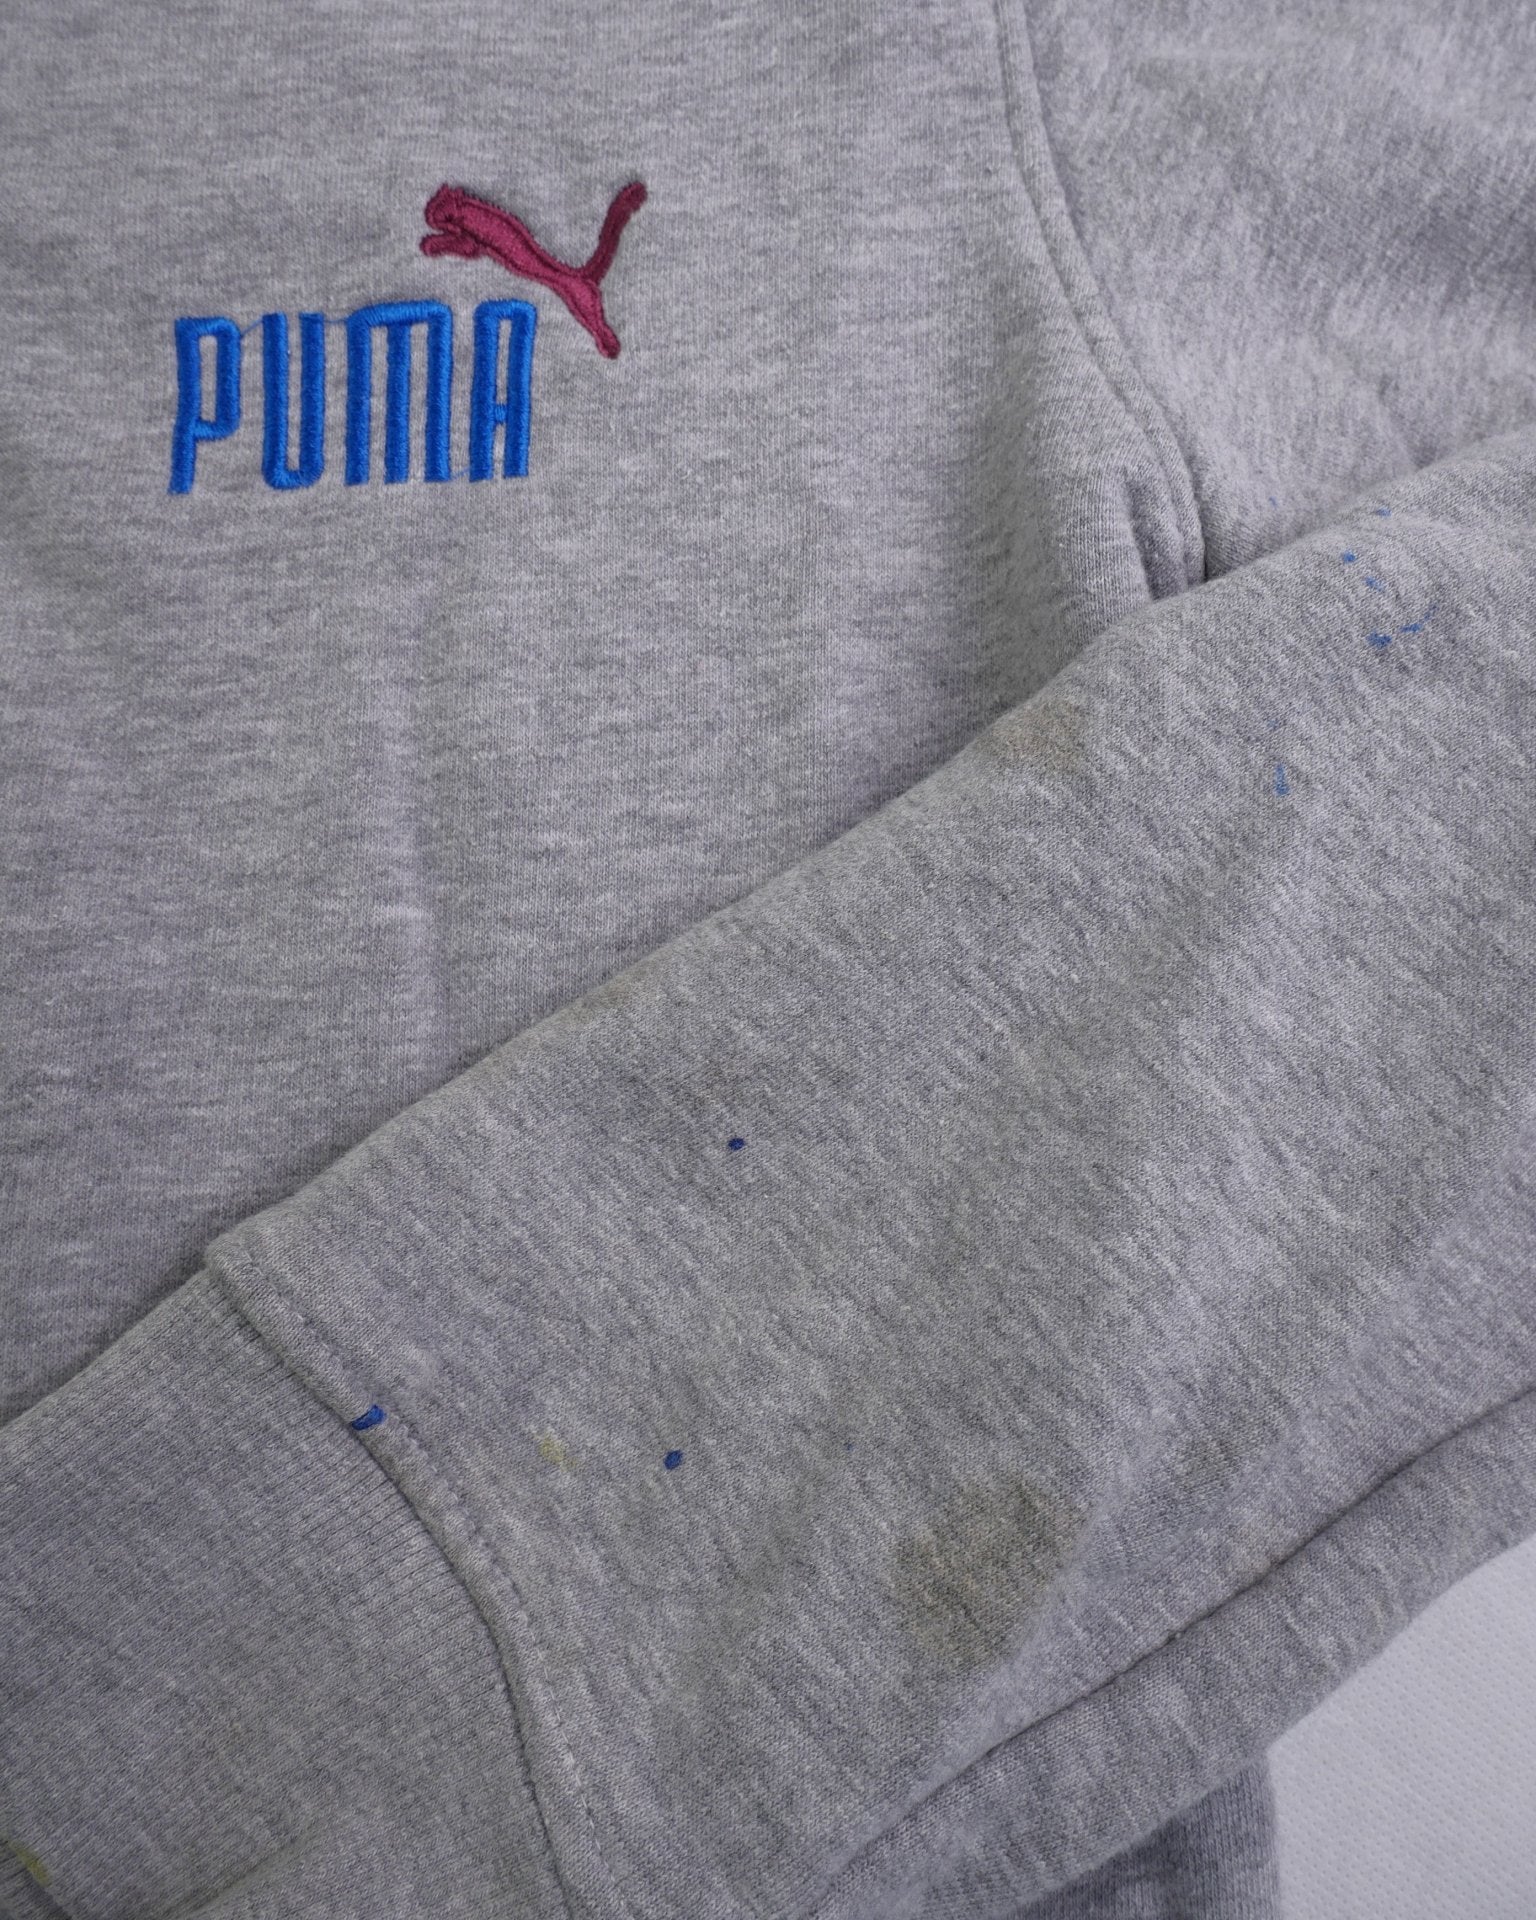 Puma embroidered Spellout Vintage Zip Hoodie - Peeces